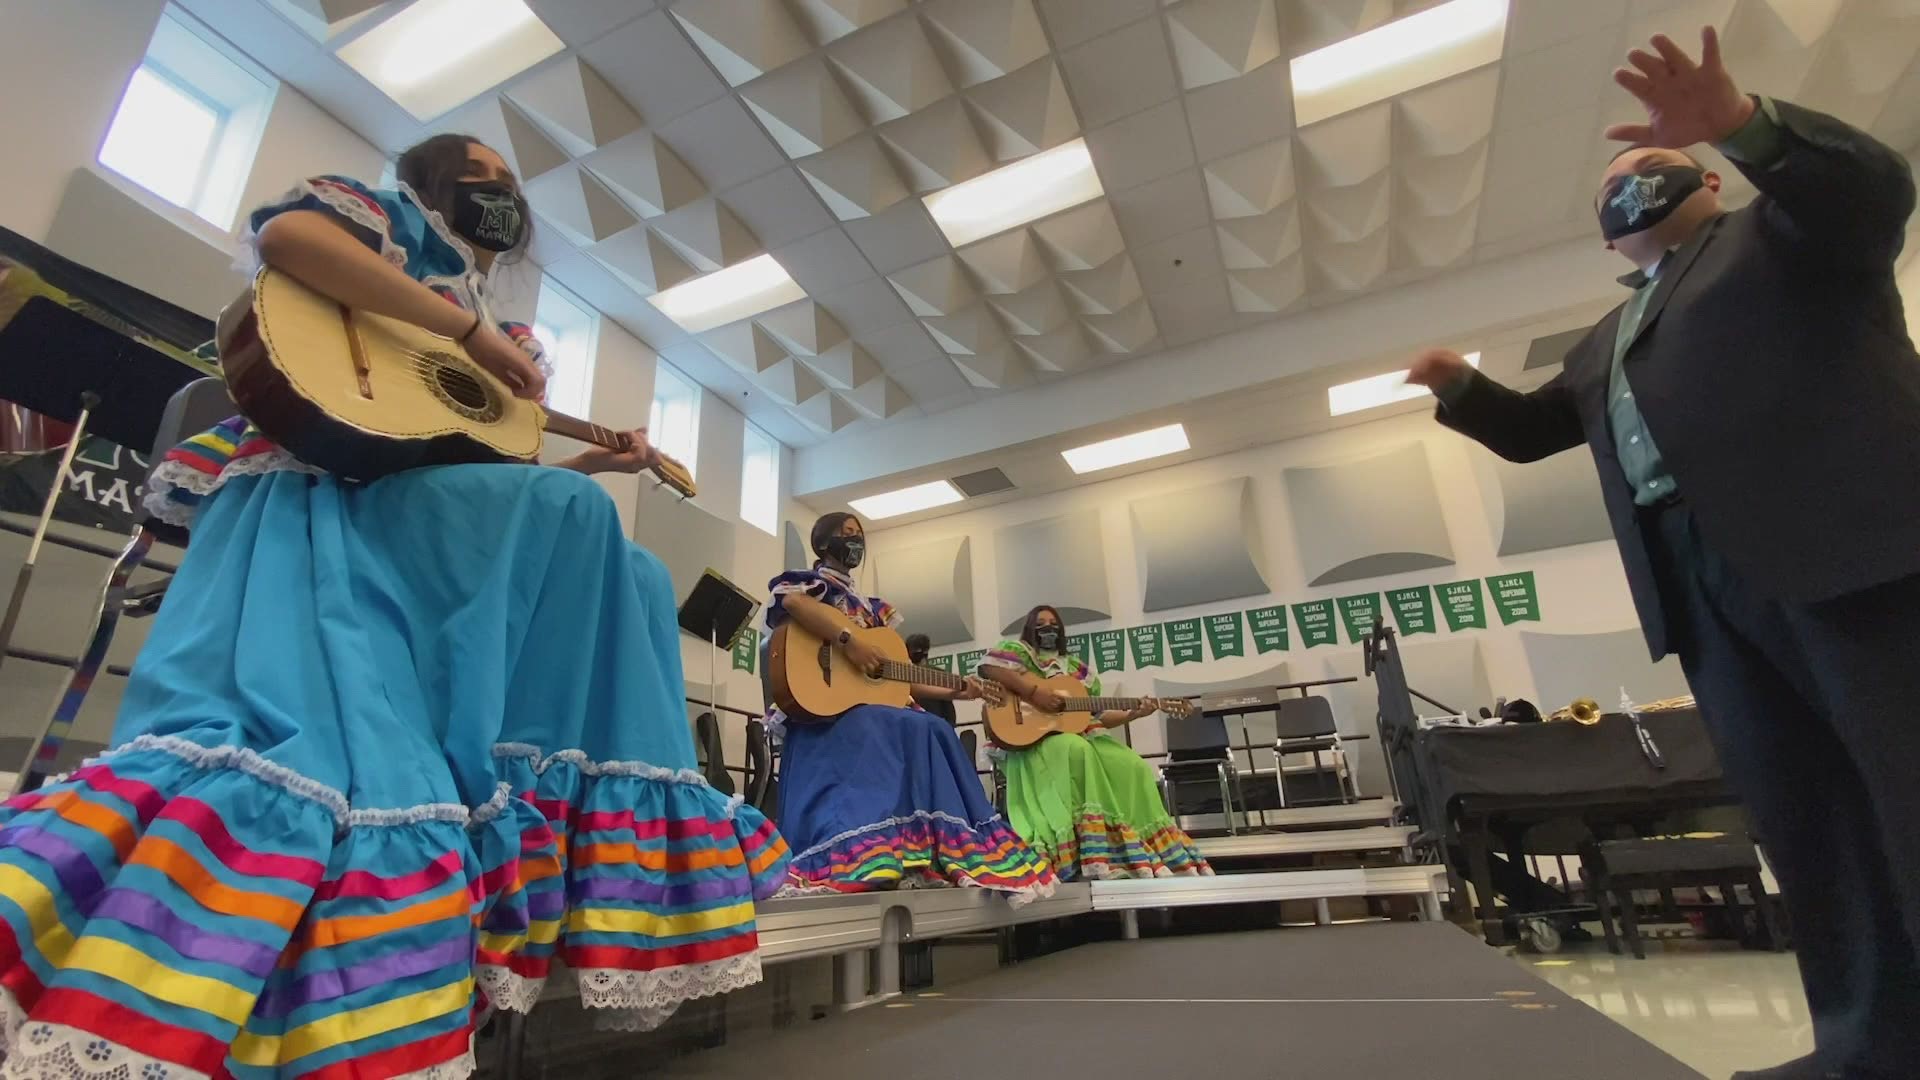 Teachers Tim Hornbacher and Ramon Rivera have teamed up to teach their students about cultural diversity through food, music and song presented in unique videos.